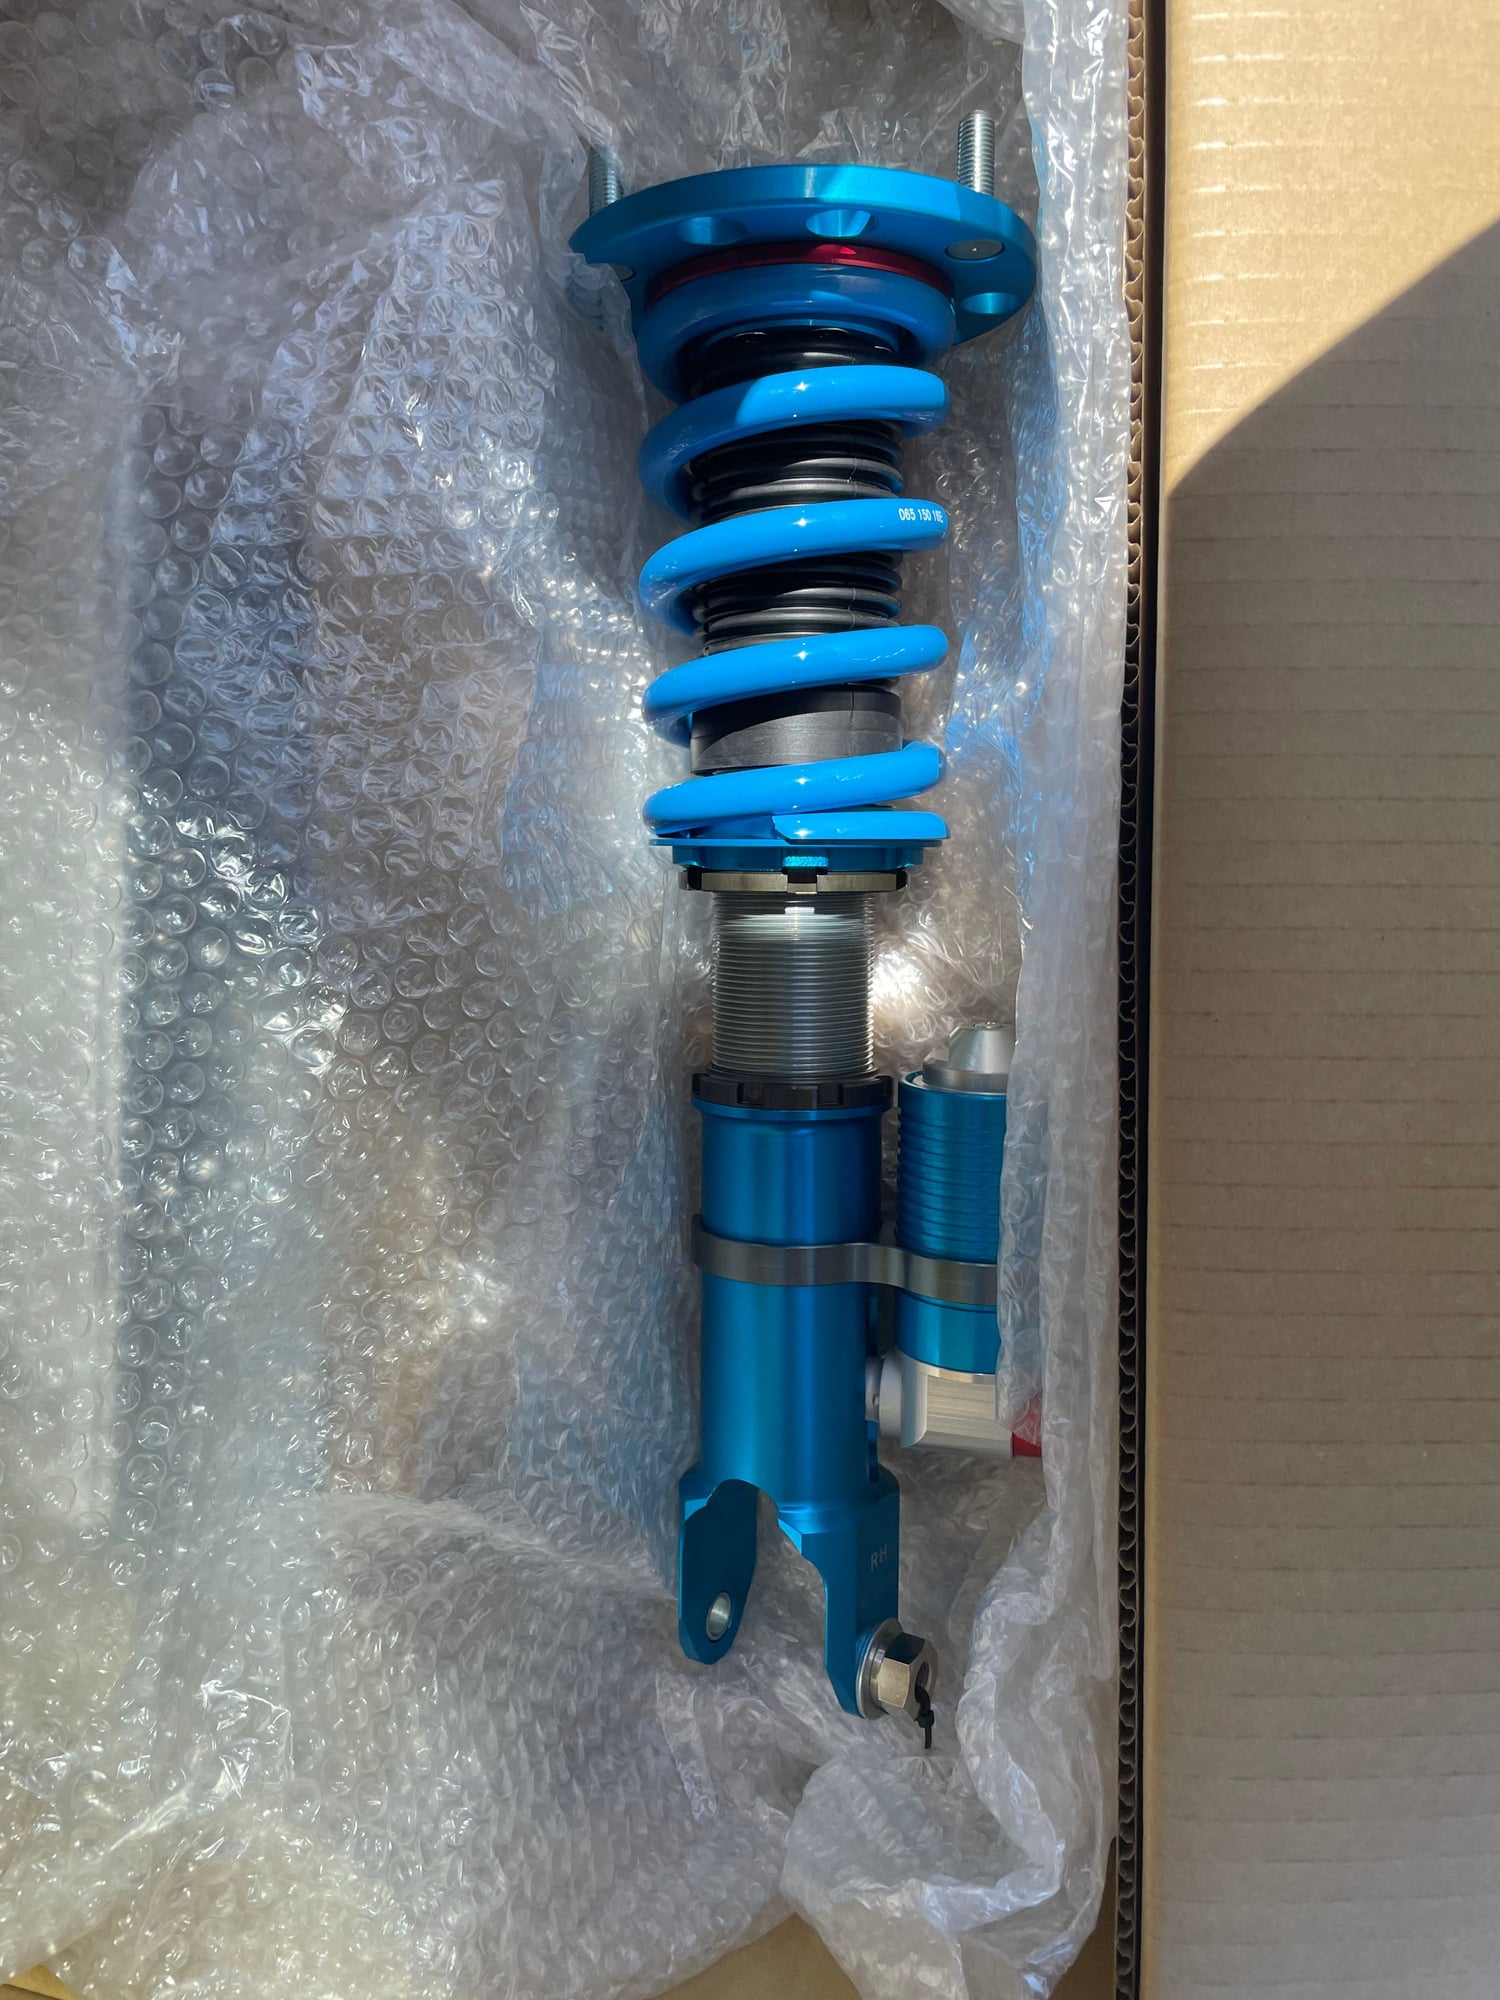 Steering/Suspension - Cusco Sport X 3 way adjustable coilovers - Brand New for FD 1992-2002 - New - 1992 to 2002 Mazda RX-7 - Torrance, CA 90505, United States